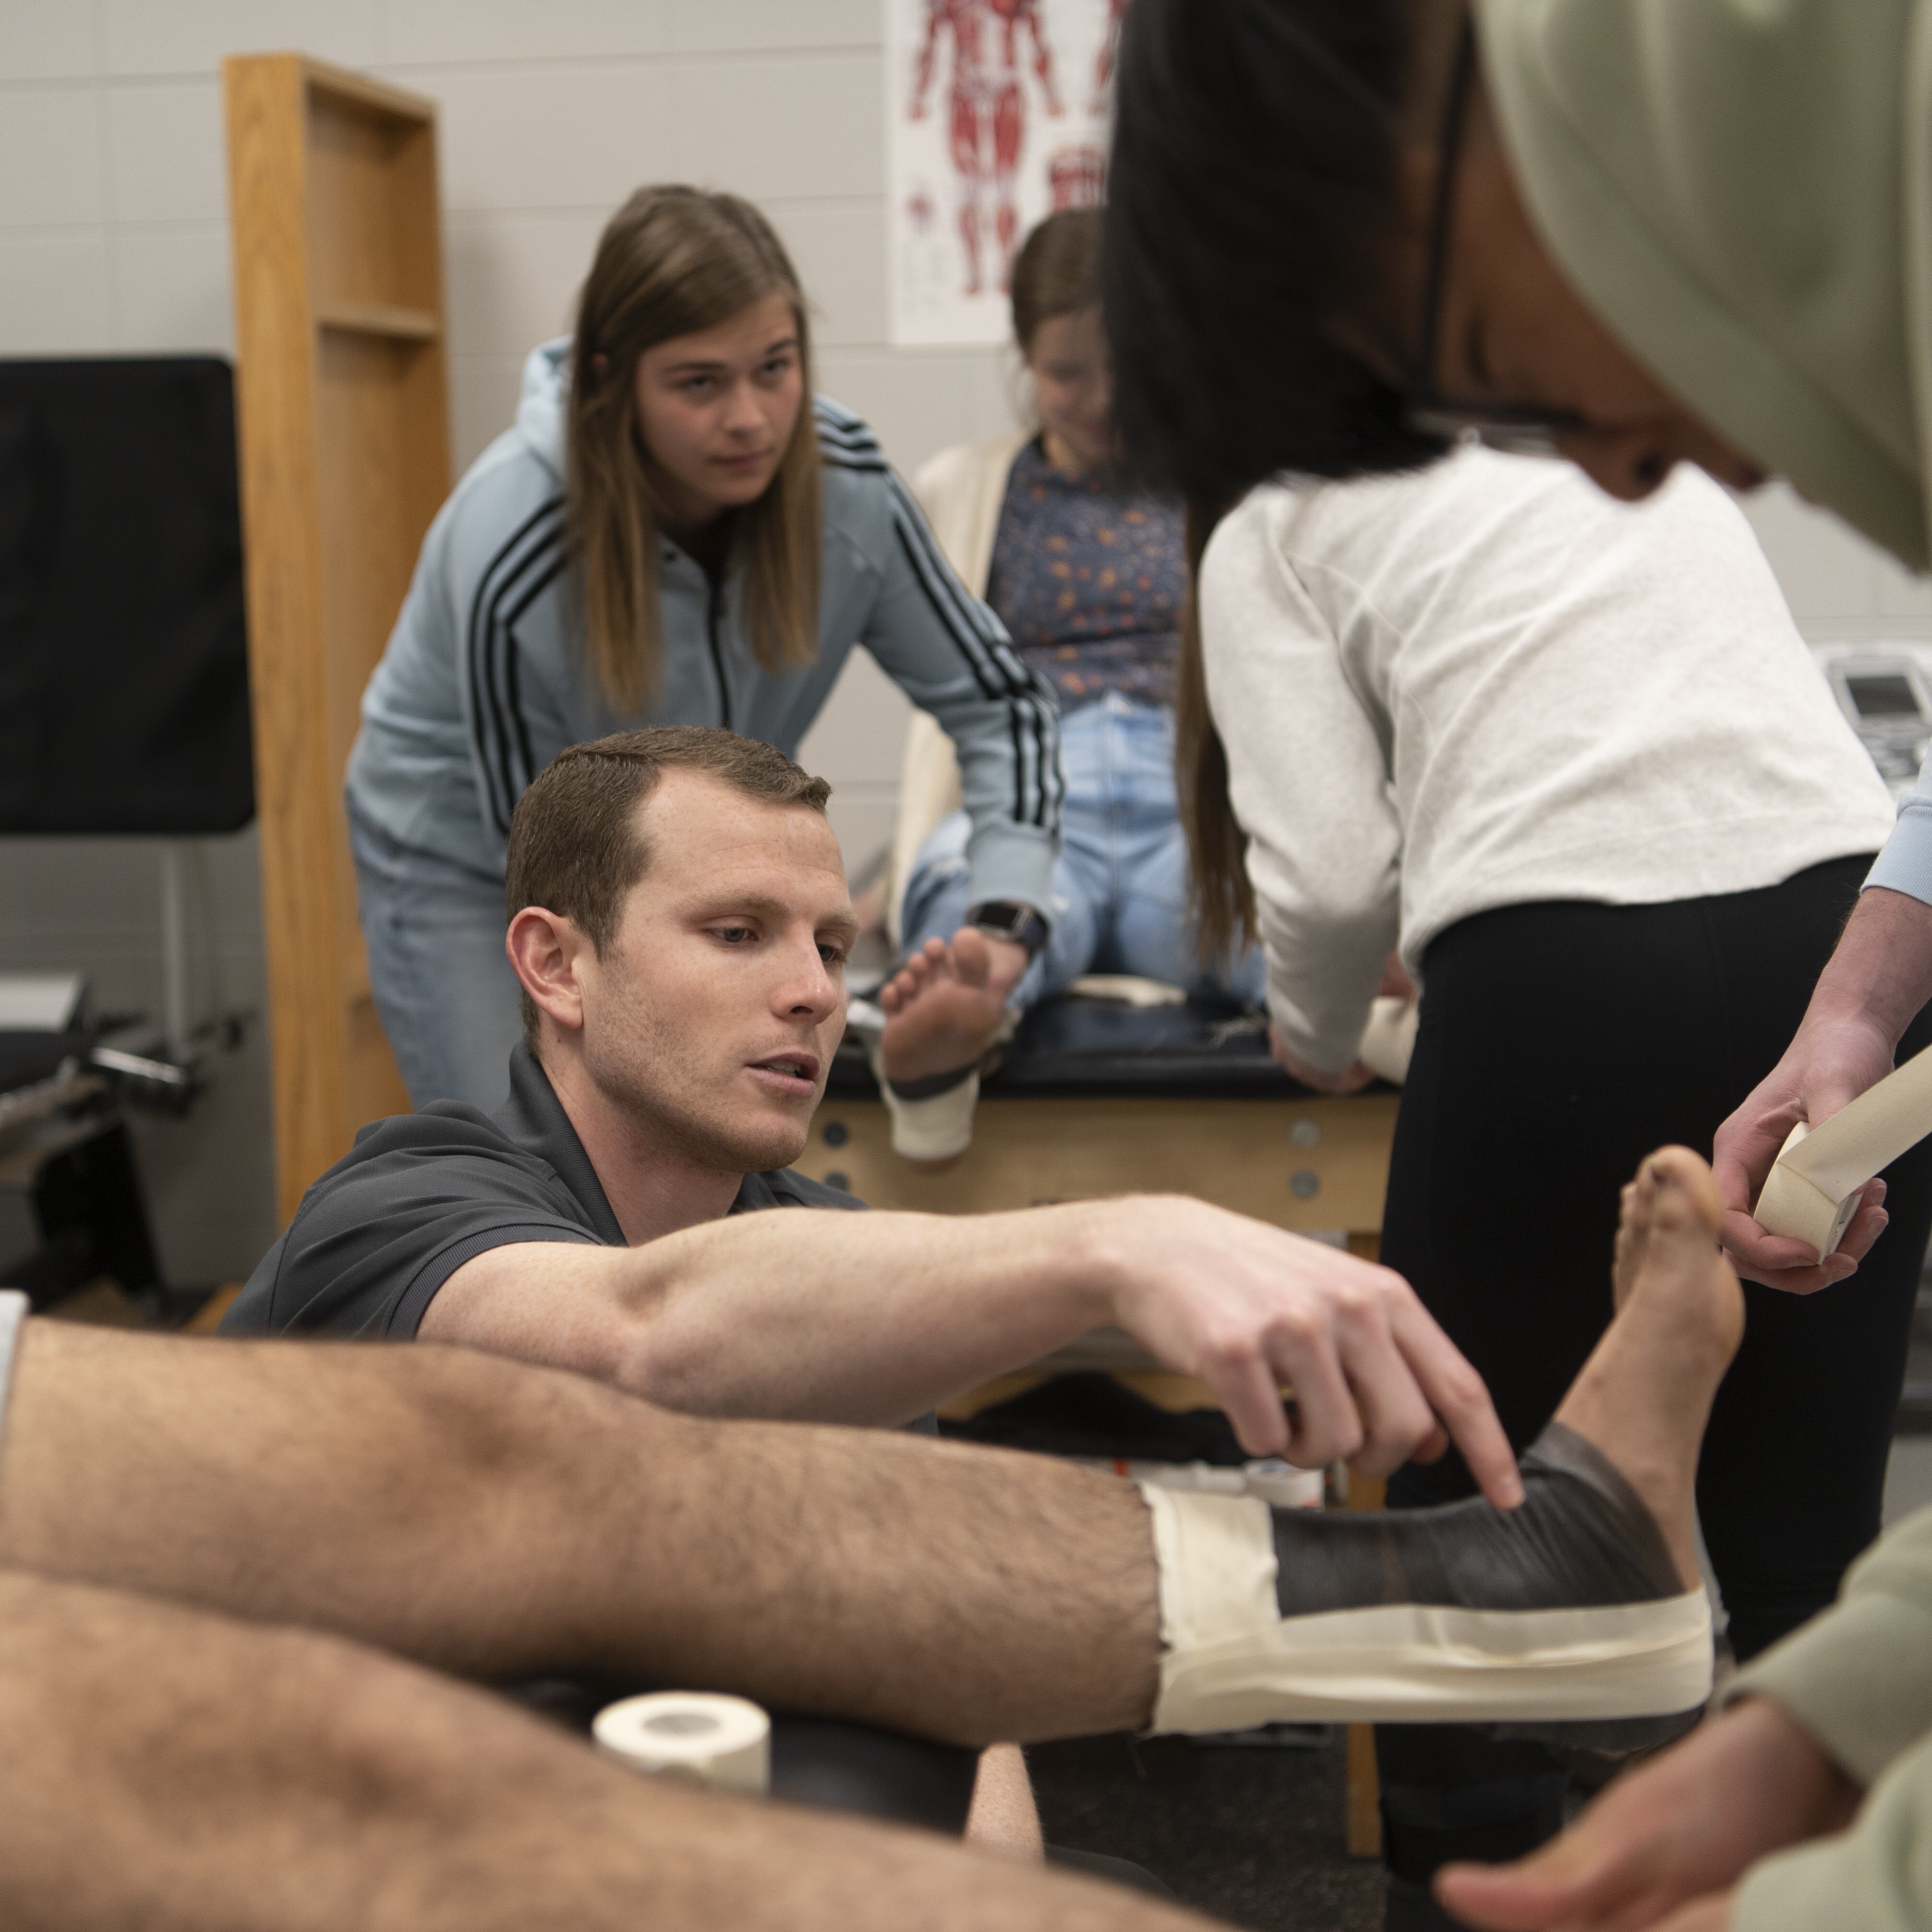 Students learning to tape a foot